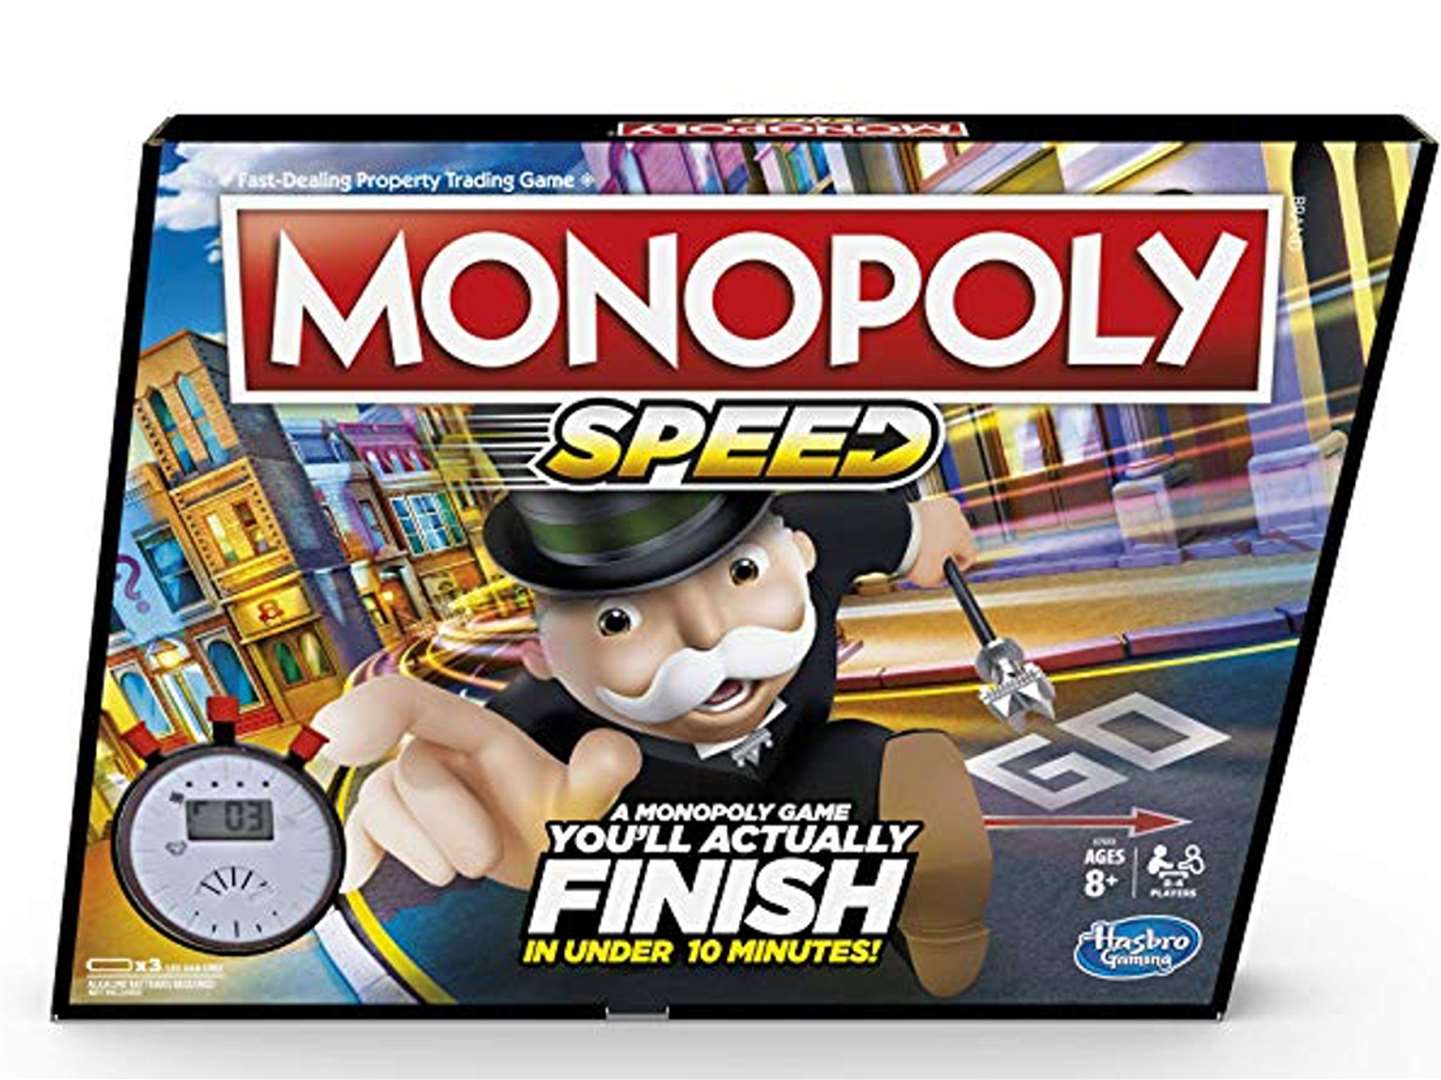 Don't want your game of Monopoly to drag on? Try Monopoly Speed Picture: PA Photo